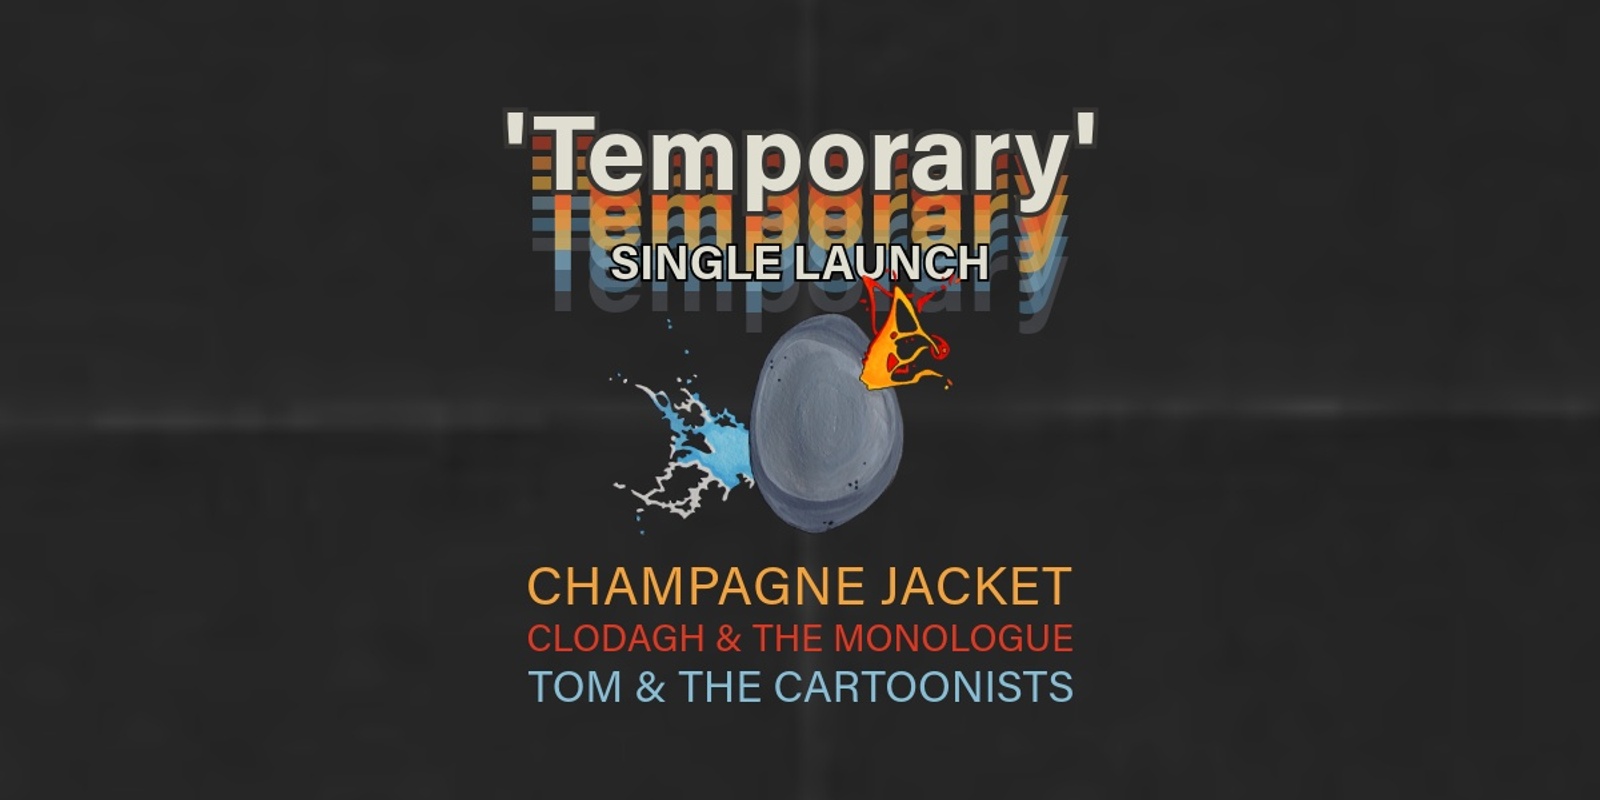 Banner image for "Temporary" single launch